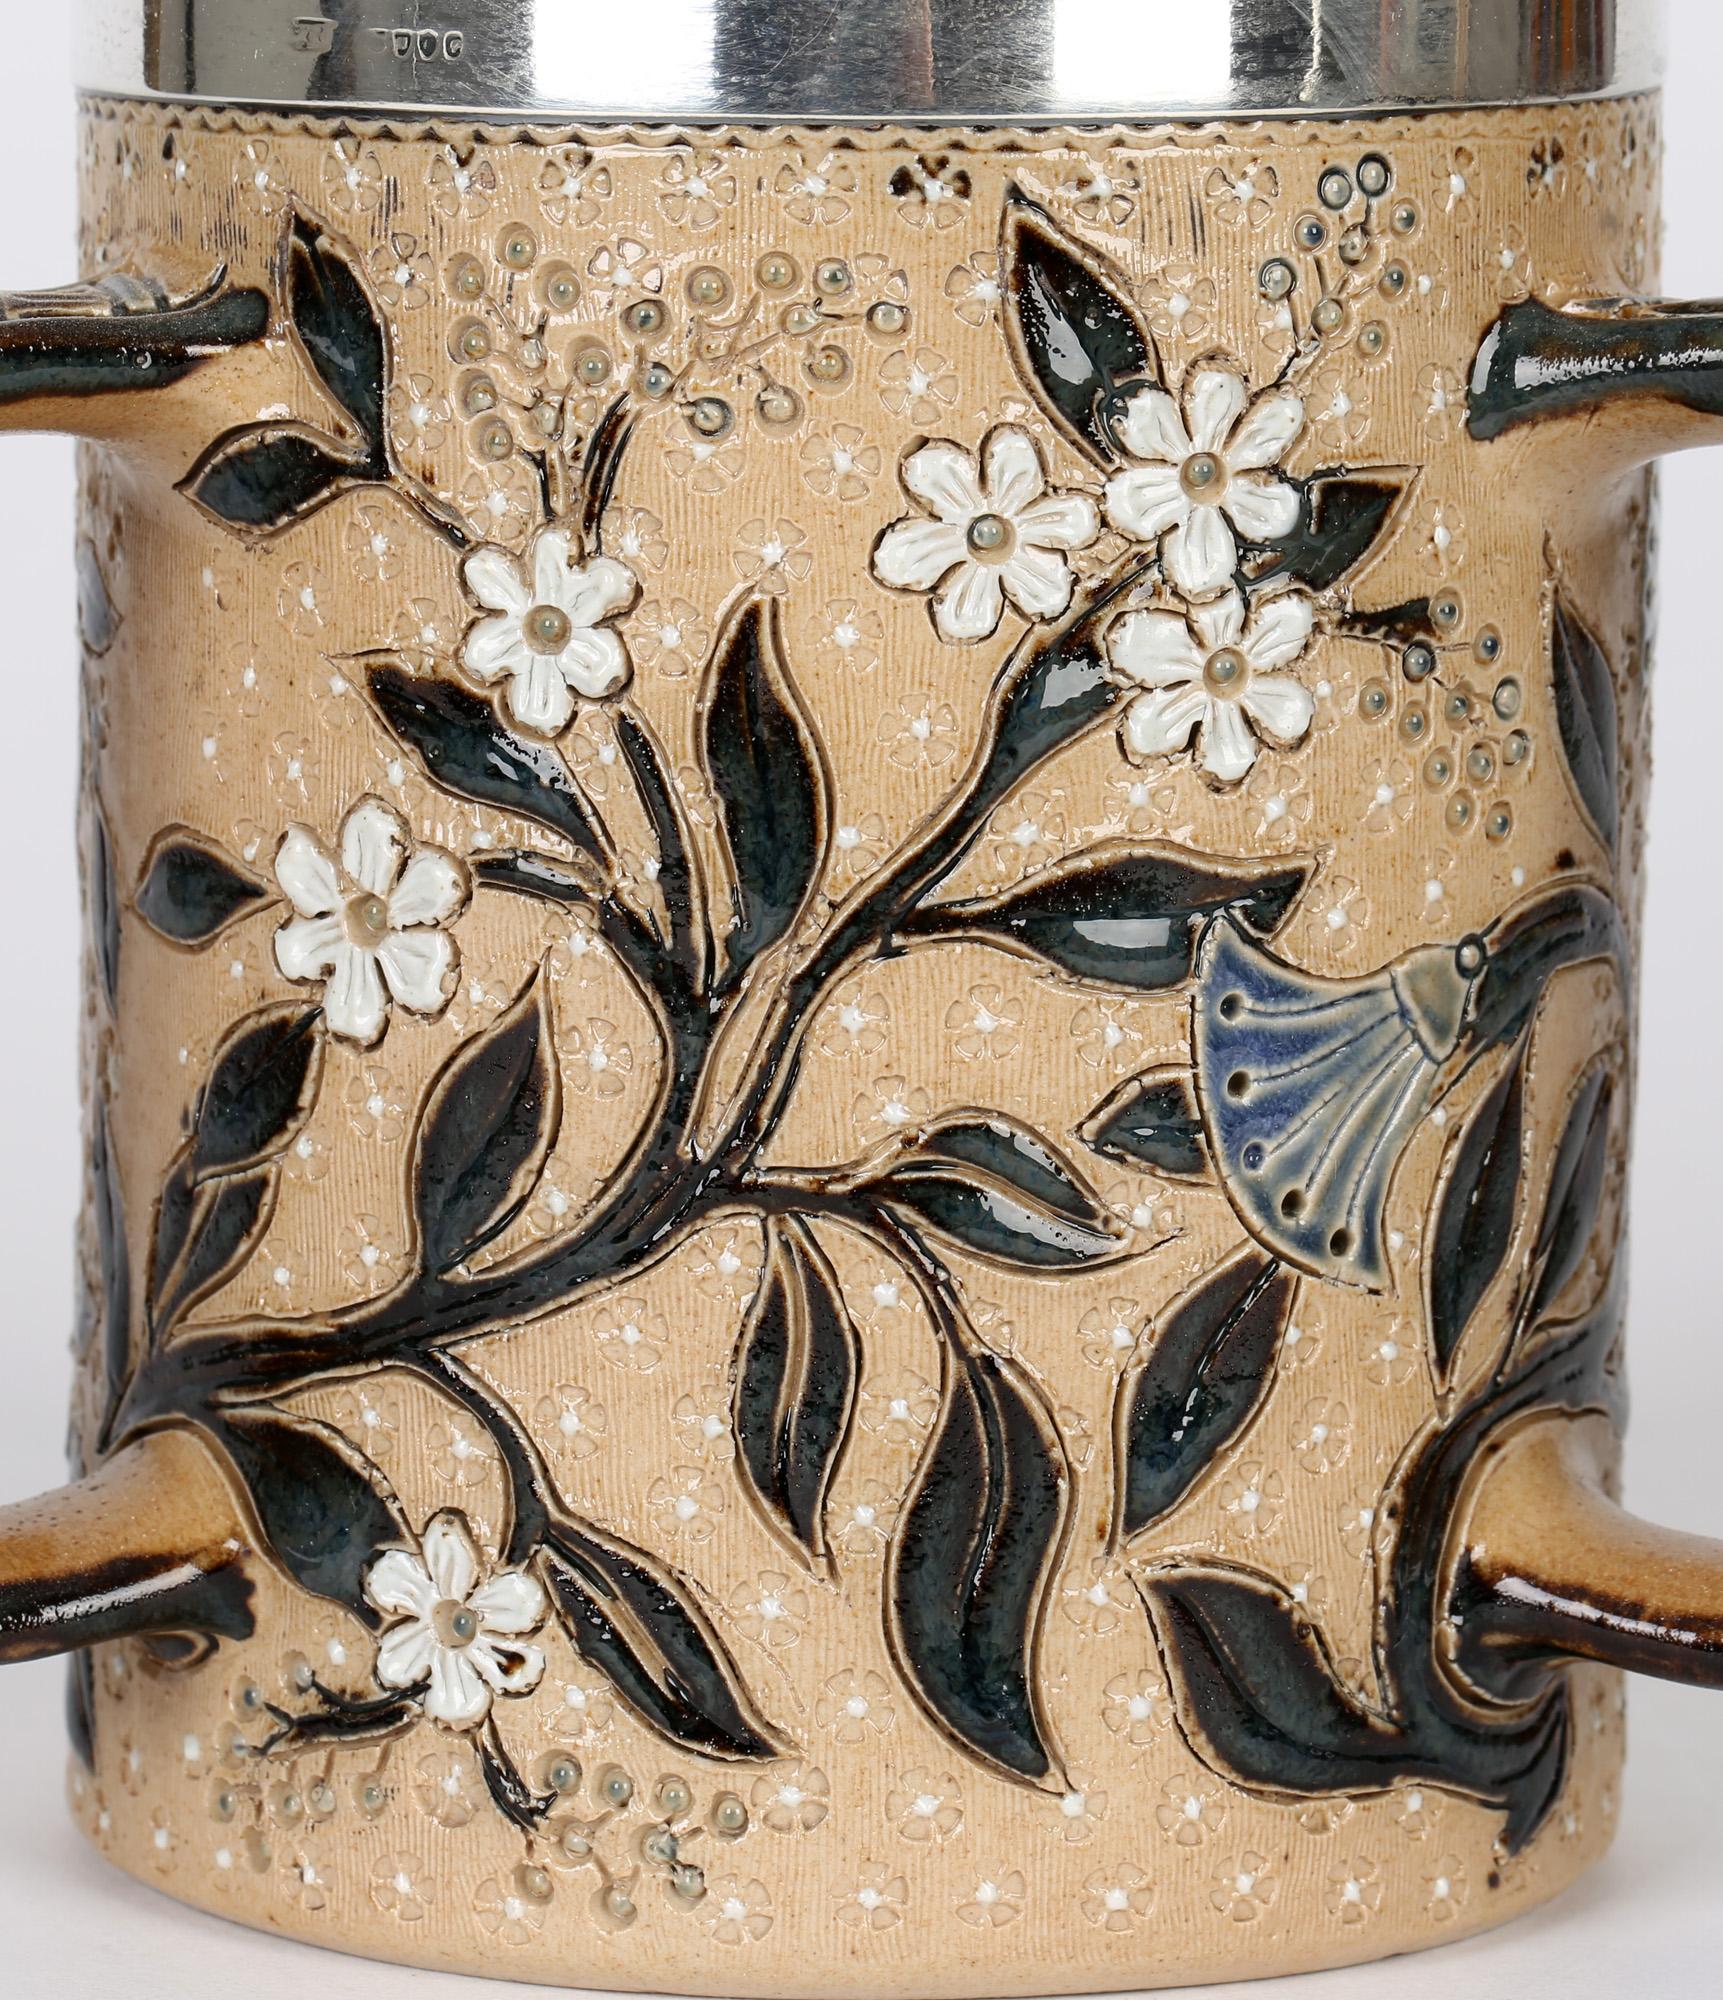 A very fine and stylish Doulton Lambeth silver mounted art pottery three handled tyg descorated with flowering stems by renowned artist Louisa Davis and dated 1878. The rounded cylindrical shaped stoneware tyg has squared off pattern molded handles,